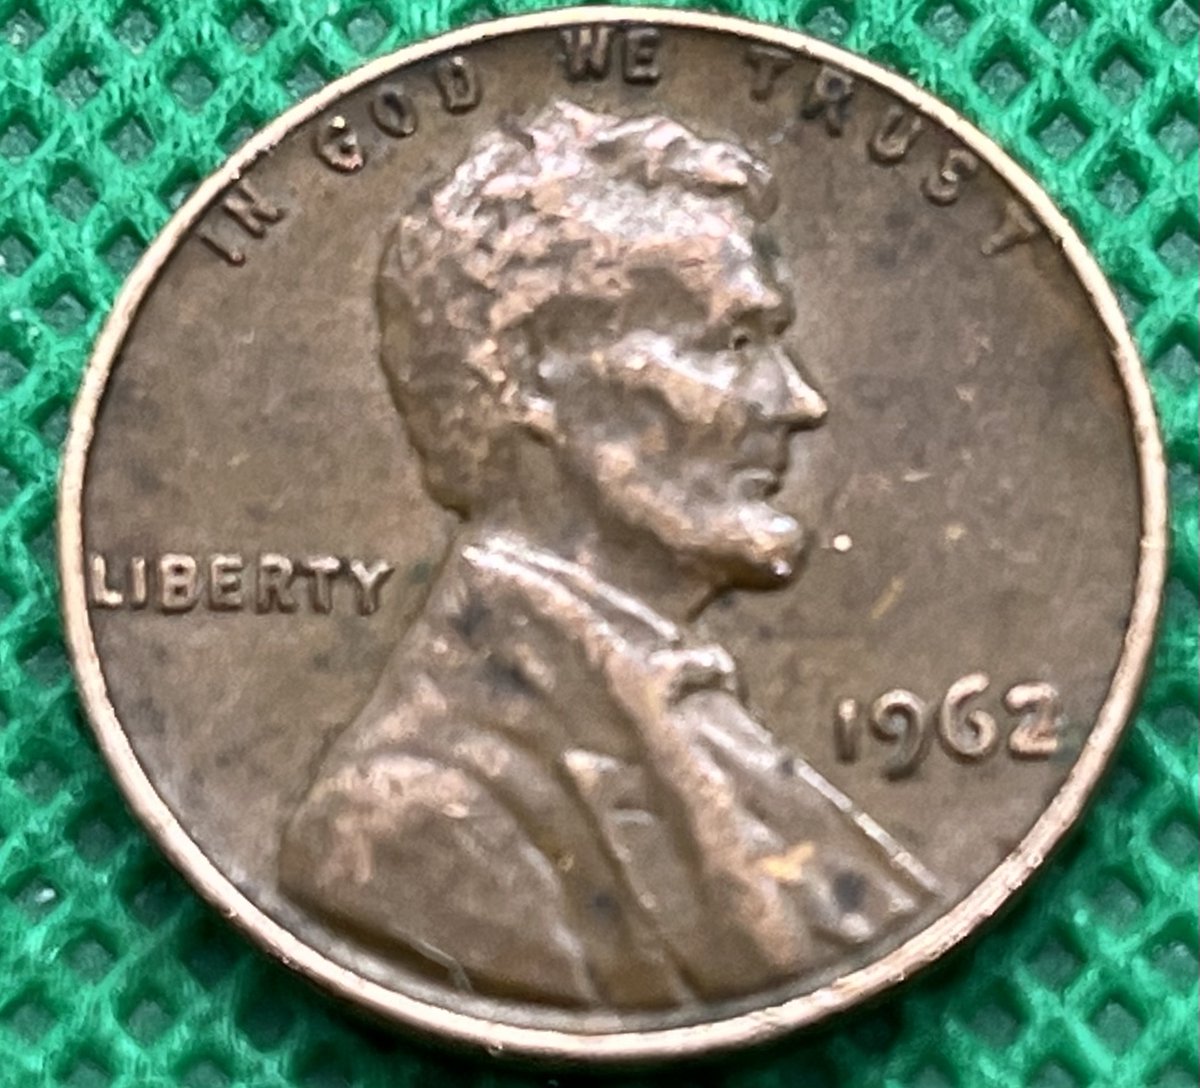 Found on the ground, New Mexico, March 2024. I took a 4-day road trip and found about $1 in change every day at gas stations, parking lots, parks, in the street. This was the only copper penny. It and all the nickels went into my copper hoard, the rest into a savings account.